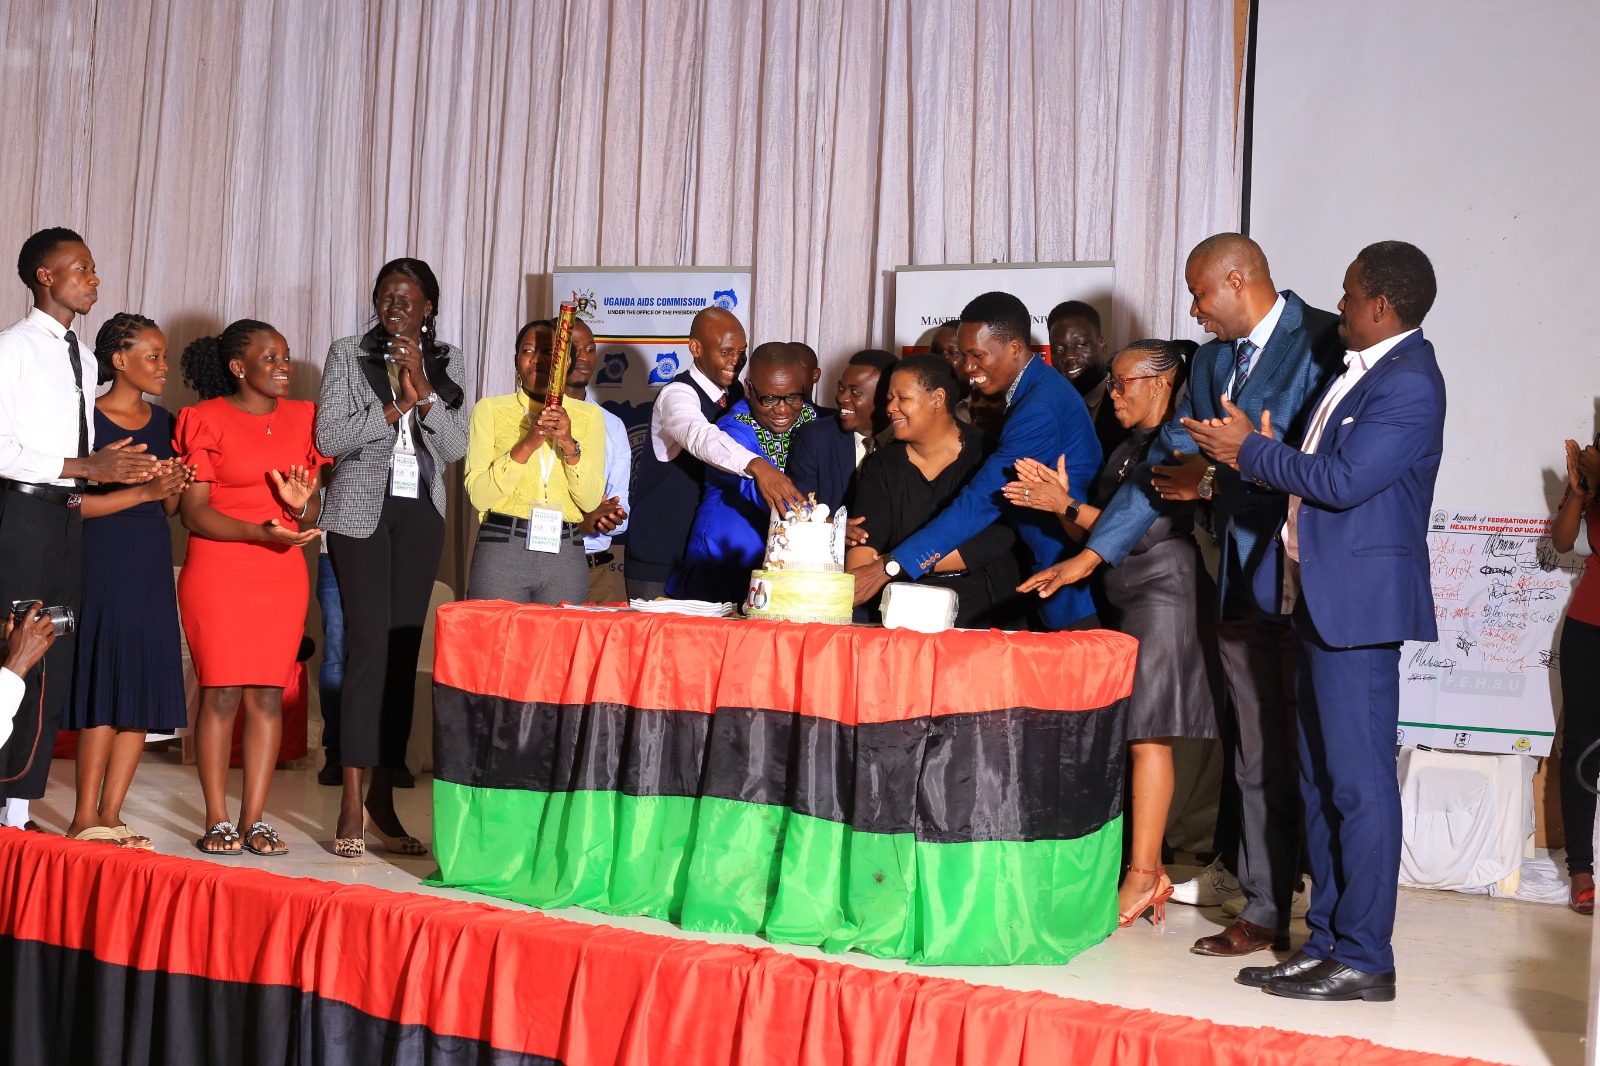 MUEHSA leadership and invited celebrate the 18th annual MUEHSA scientific conference following a two-day conference at the Yusuf Lule Central Teaching Facility with cake cutting.